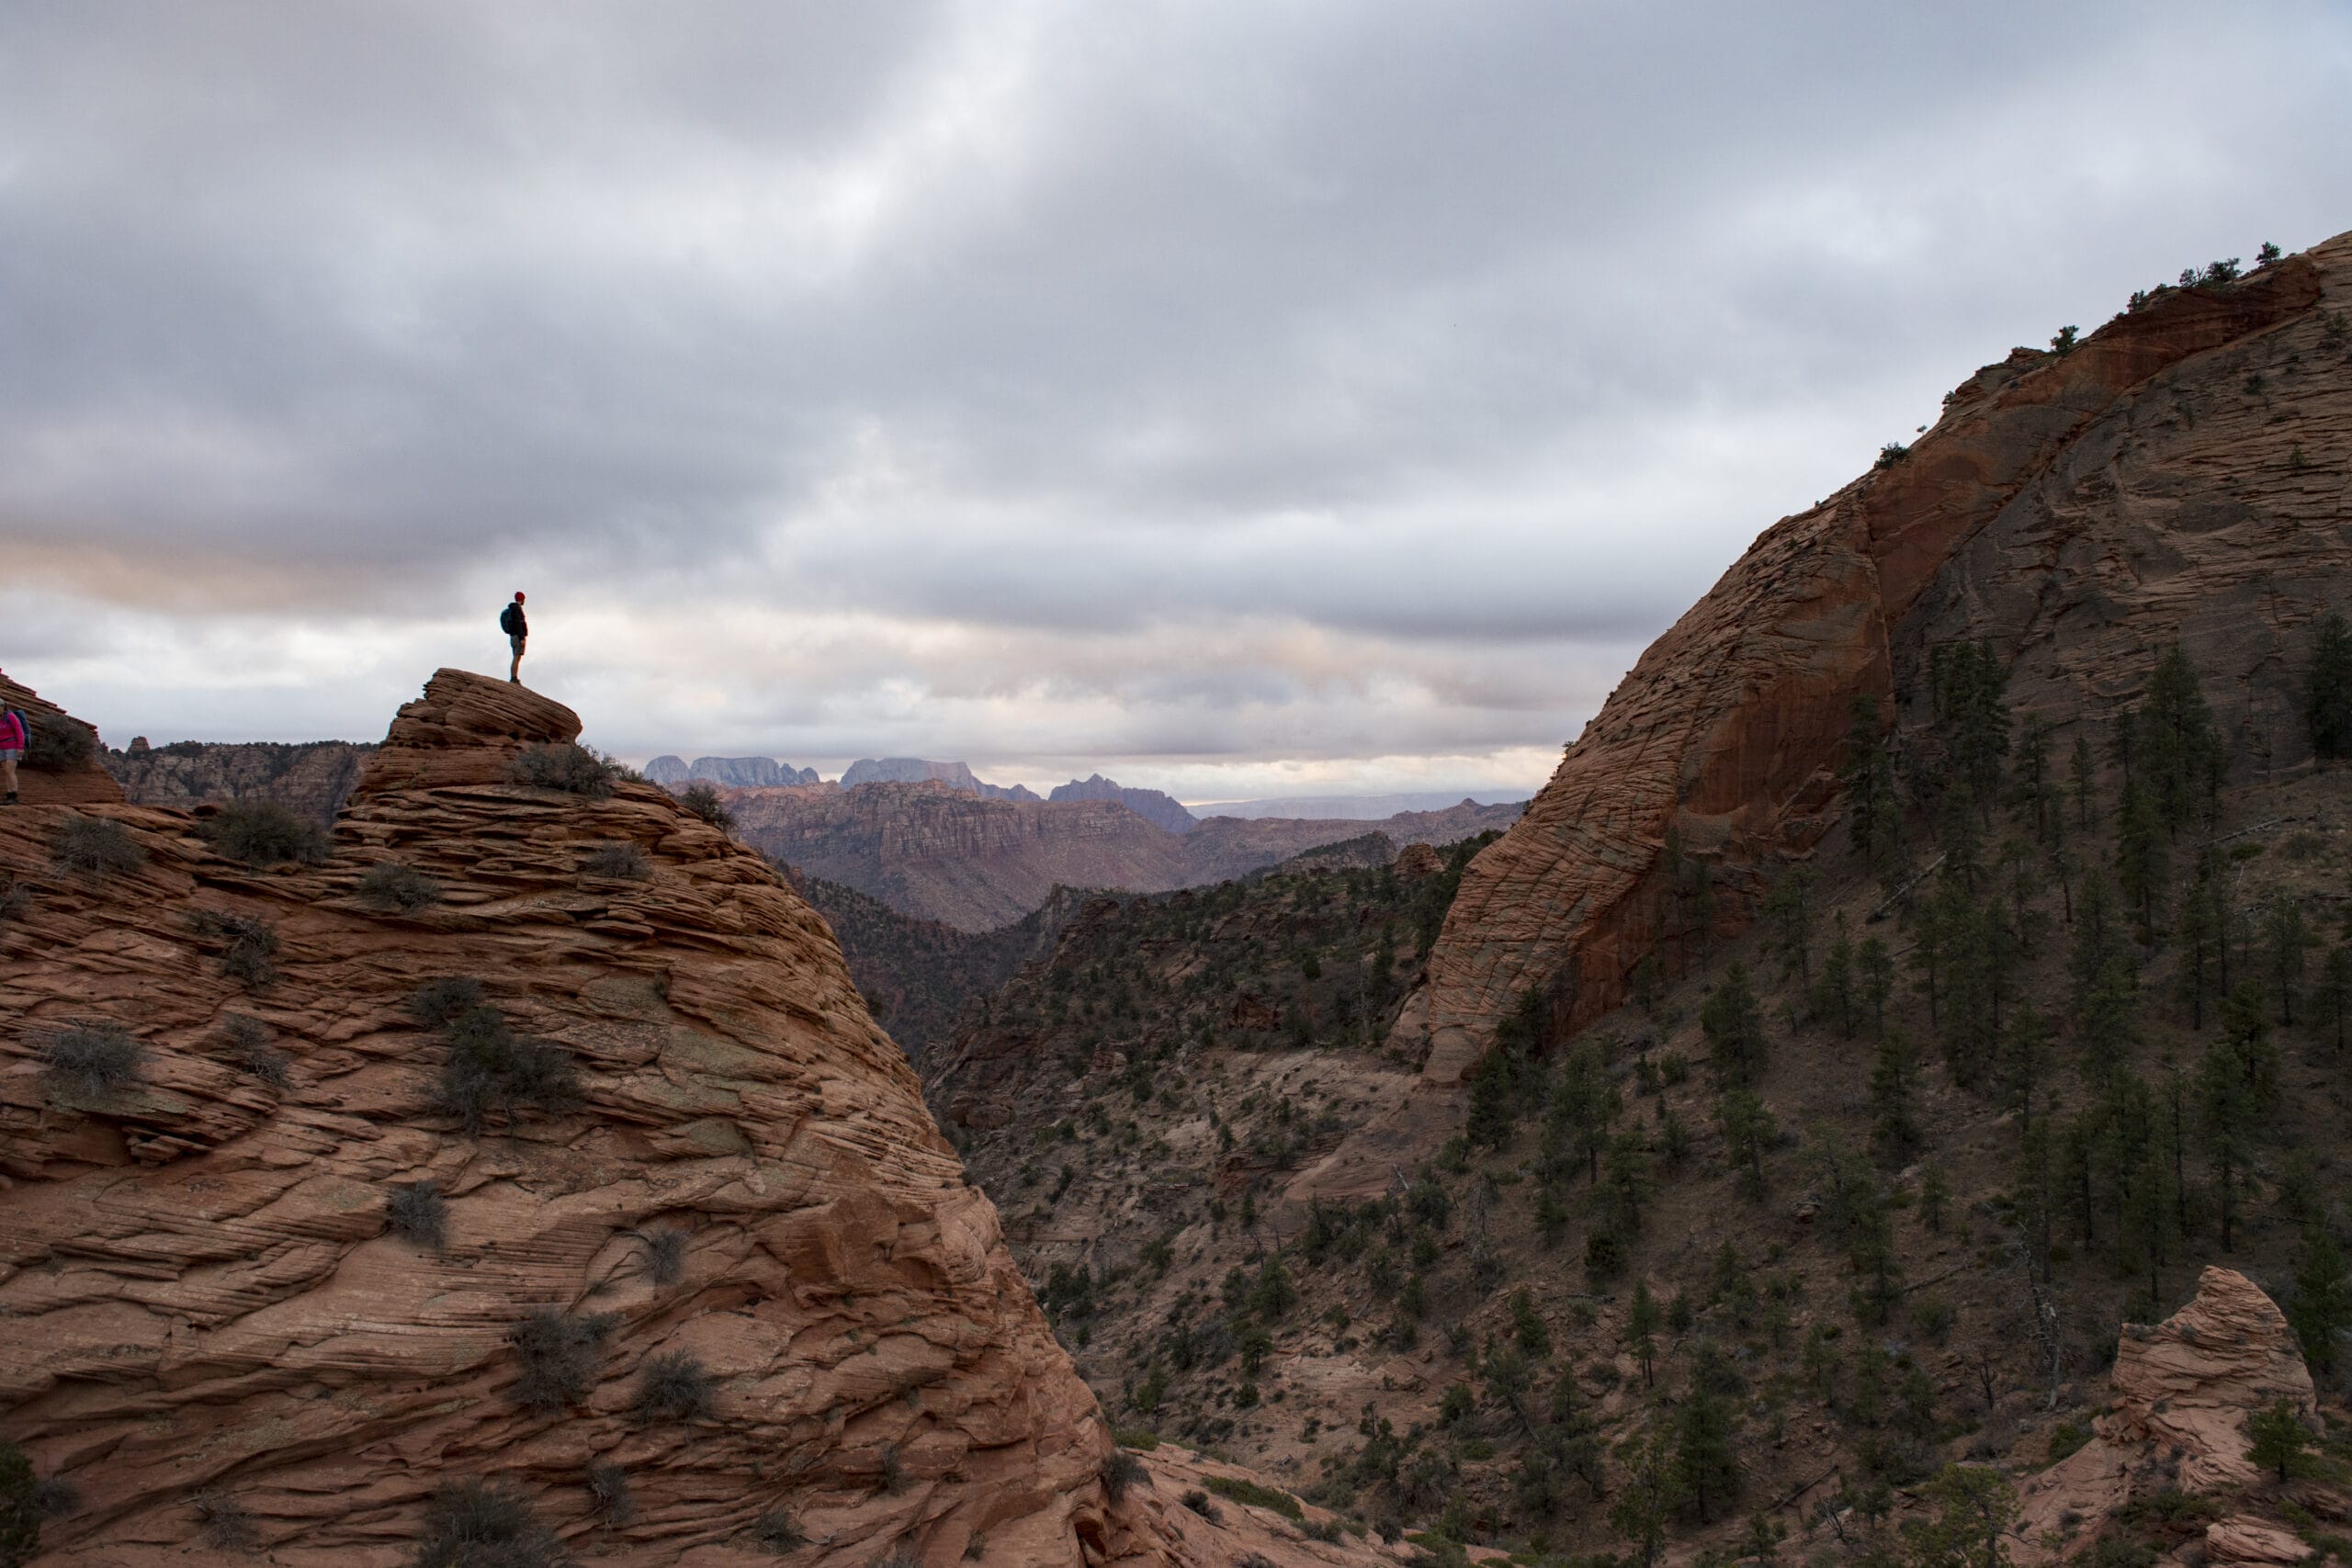 A person standing on top of a rocky cliff.